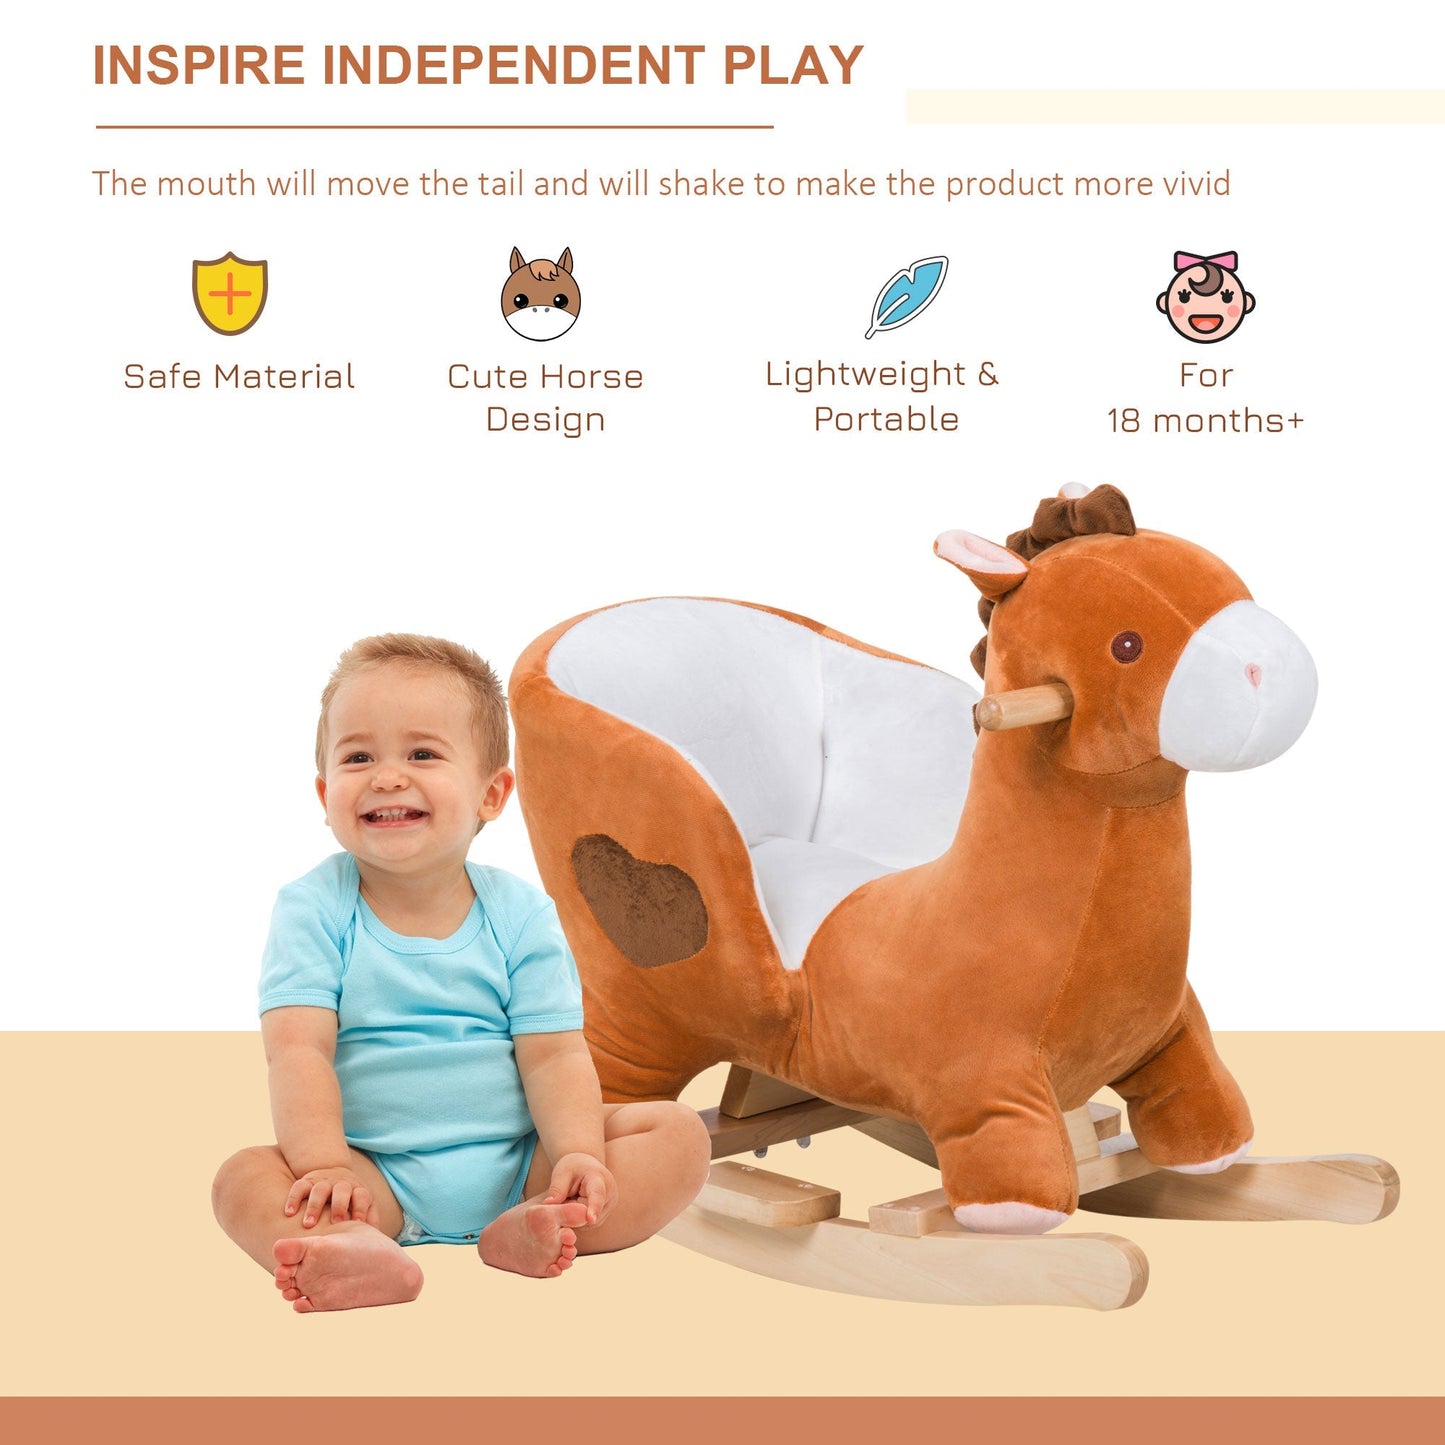 Kids Plush Rocking Horse Stuffed Animal Rocker Child Ride On Toy with Realistic Sound Red Brown at Gallery Canada